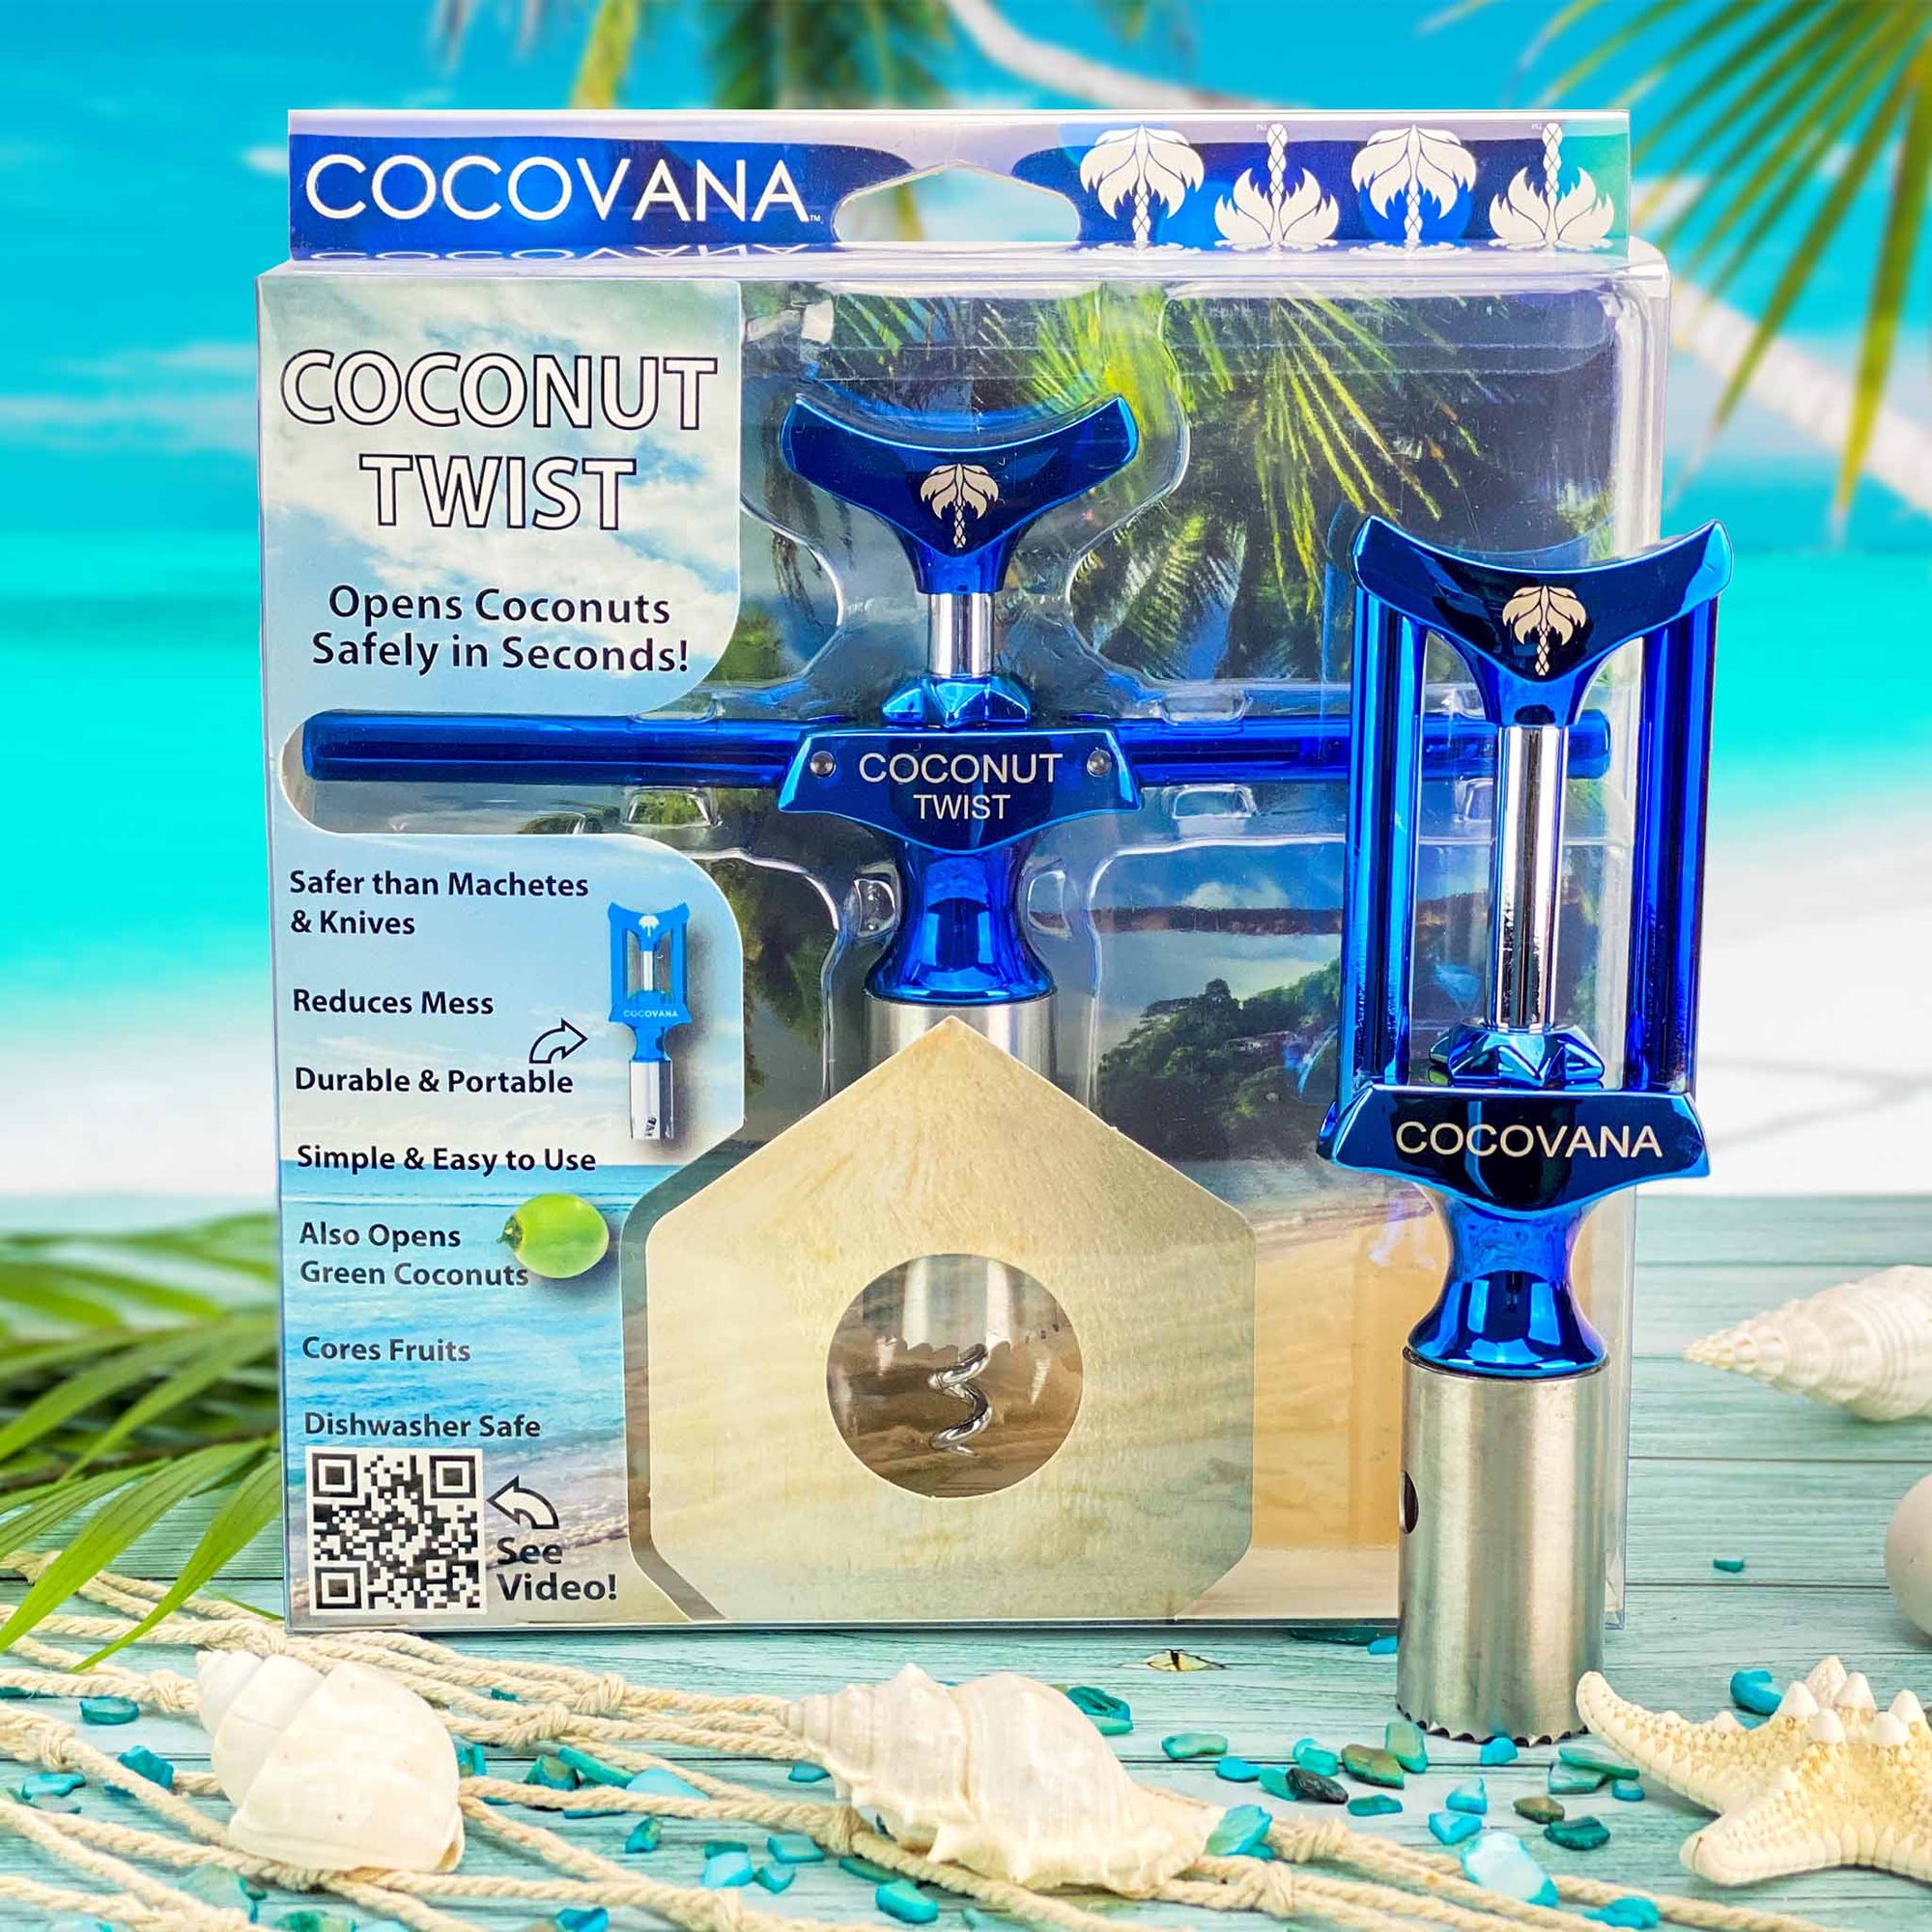 Cocovana Coconut Twist Beach Tropical Tree Ocean Sand Branch Tool Opener Blue Turquoise Steel Metal Stainless Blade Hole Saw Packaging